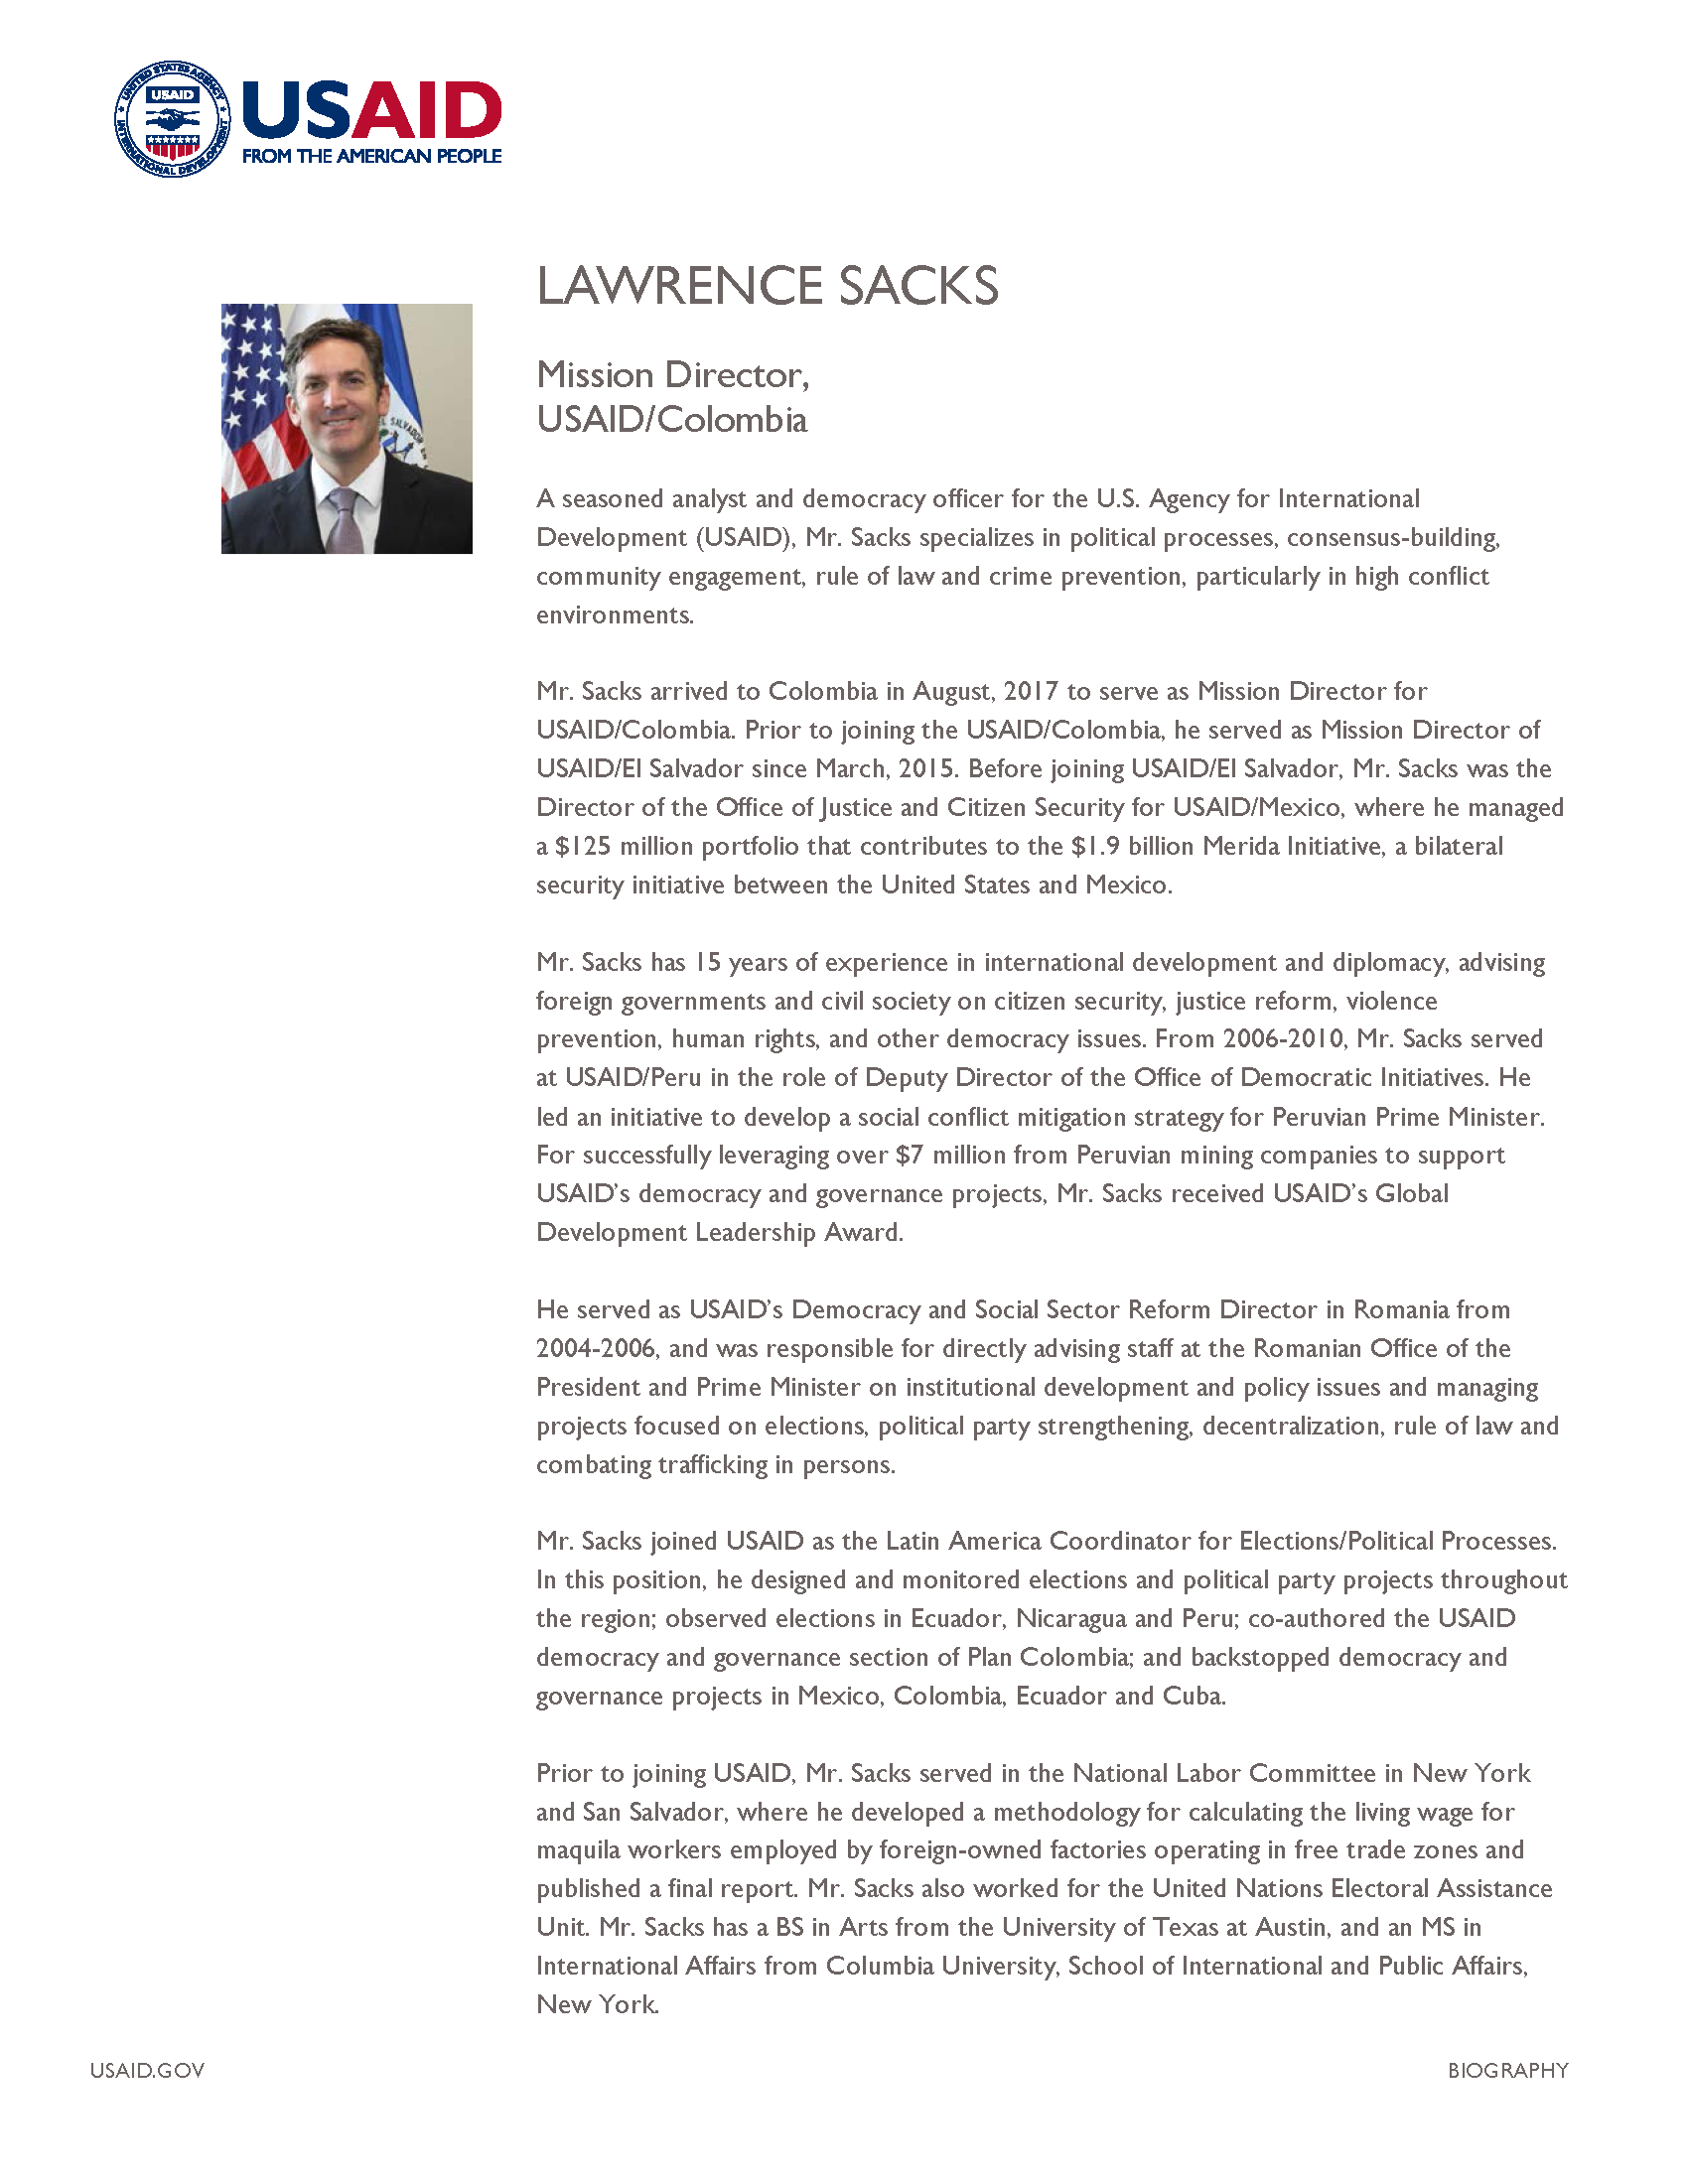 Lawrence Sacks - Mission Director, USAID/Colombia